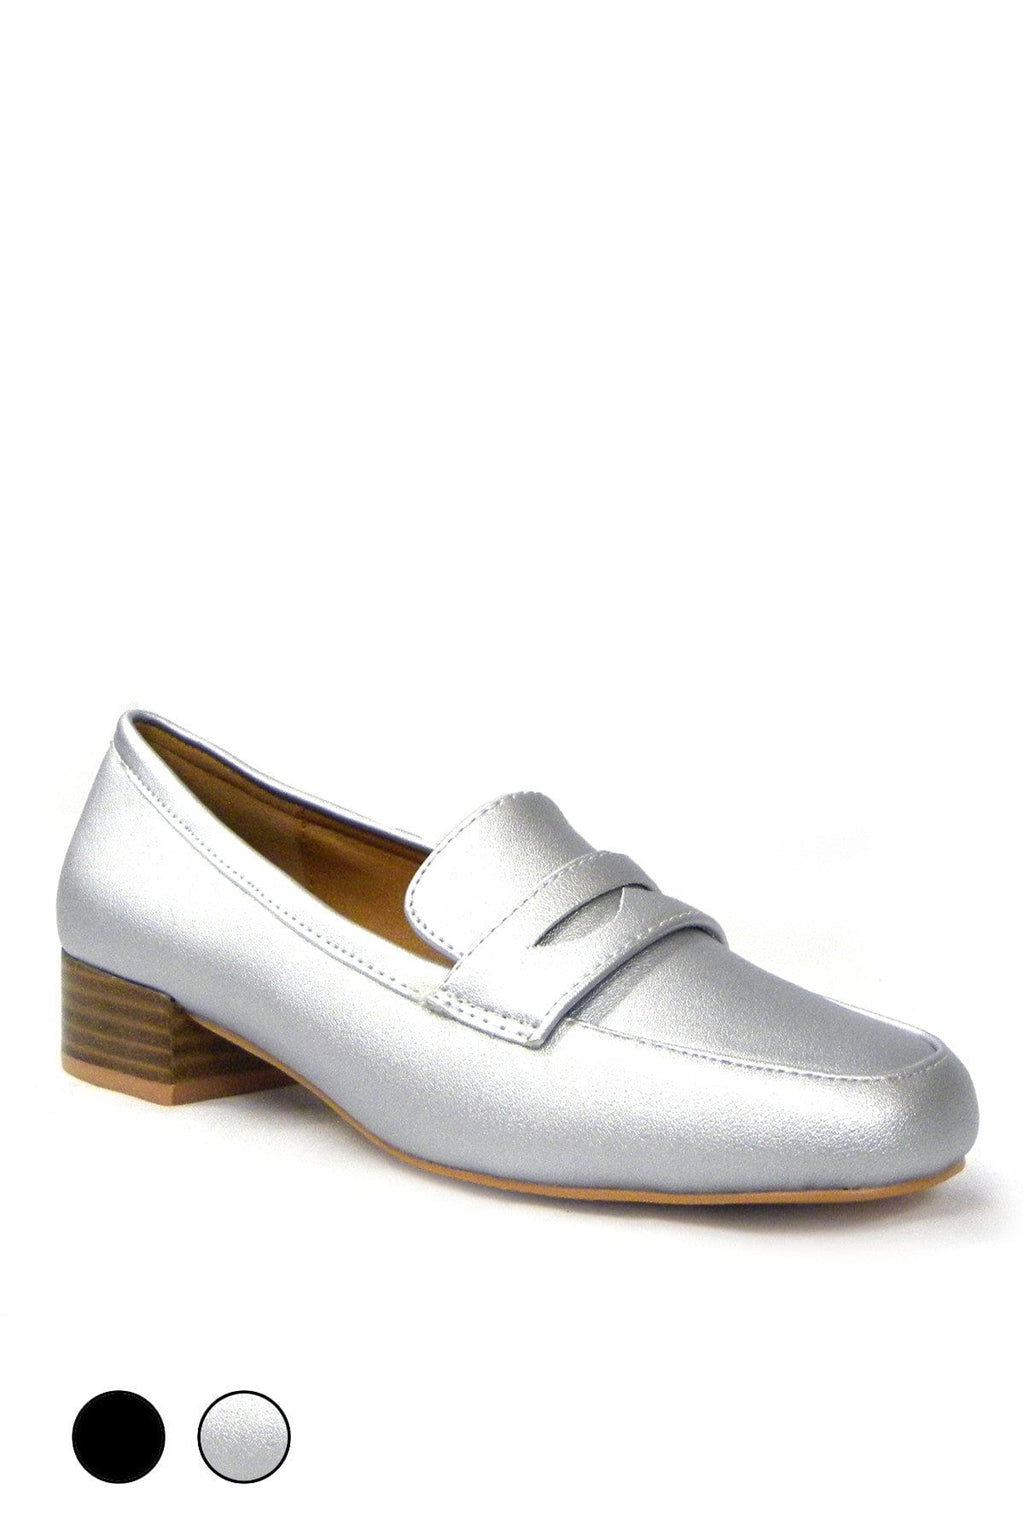 N.Y.L.A. Shoes SHOES N.Y.L.A. Shoes Lomo Women's Loafer Flats in Silver or Black